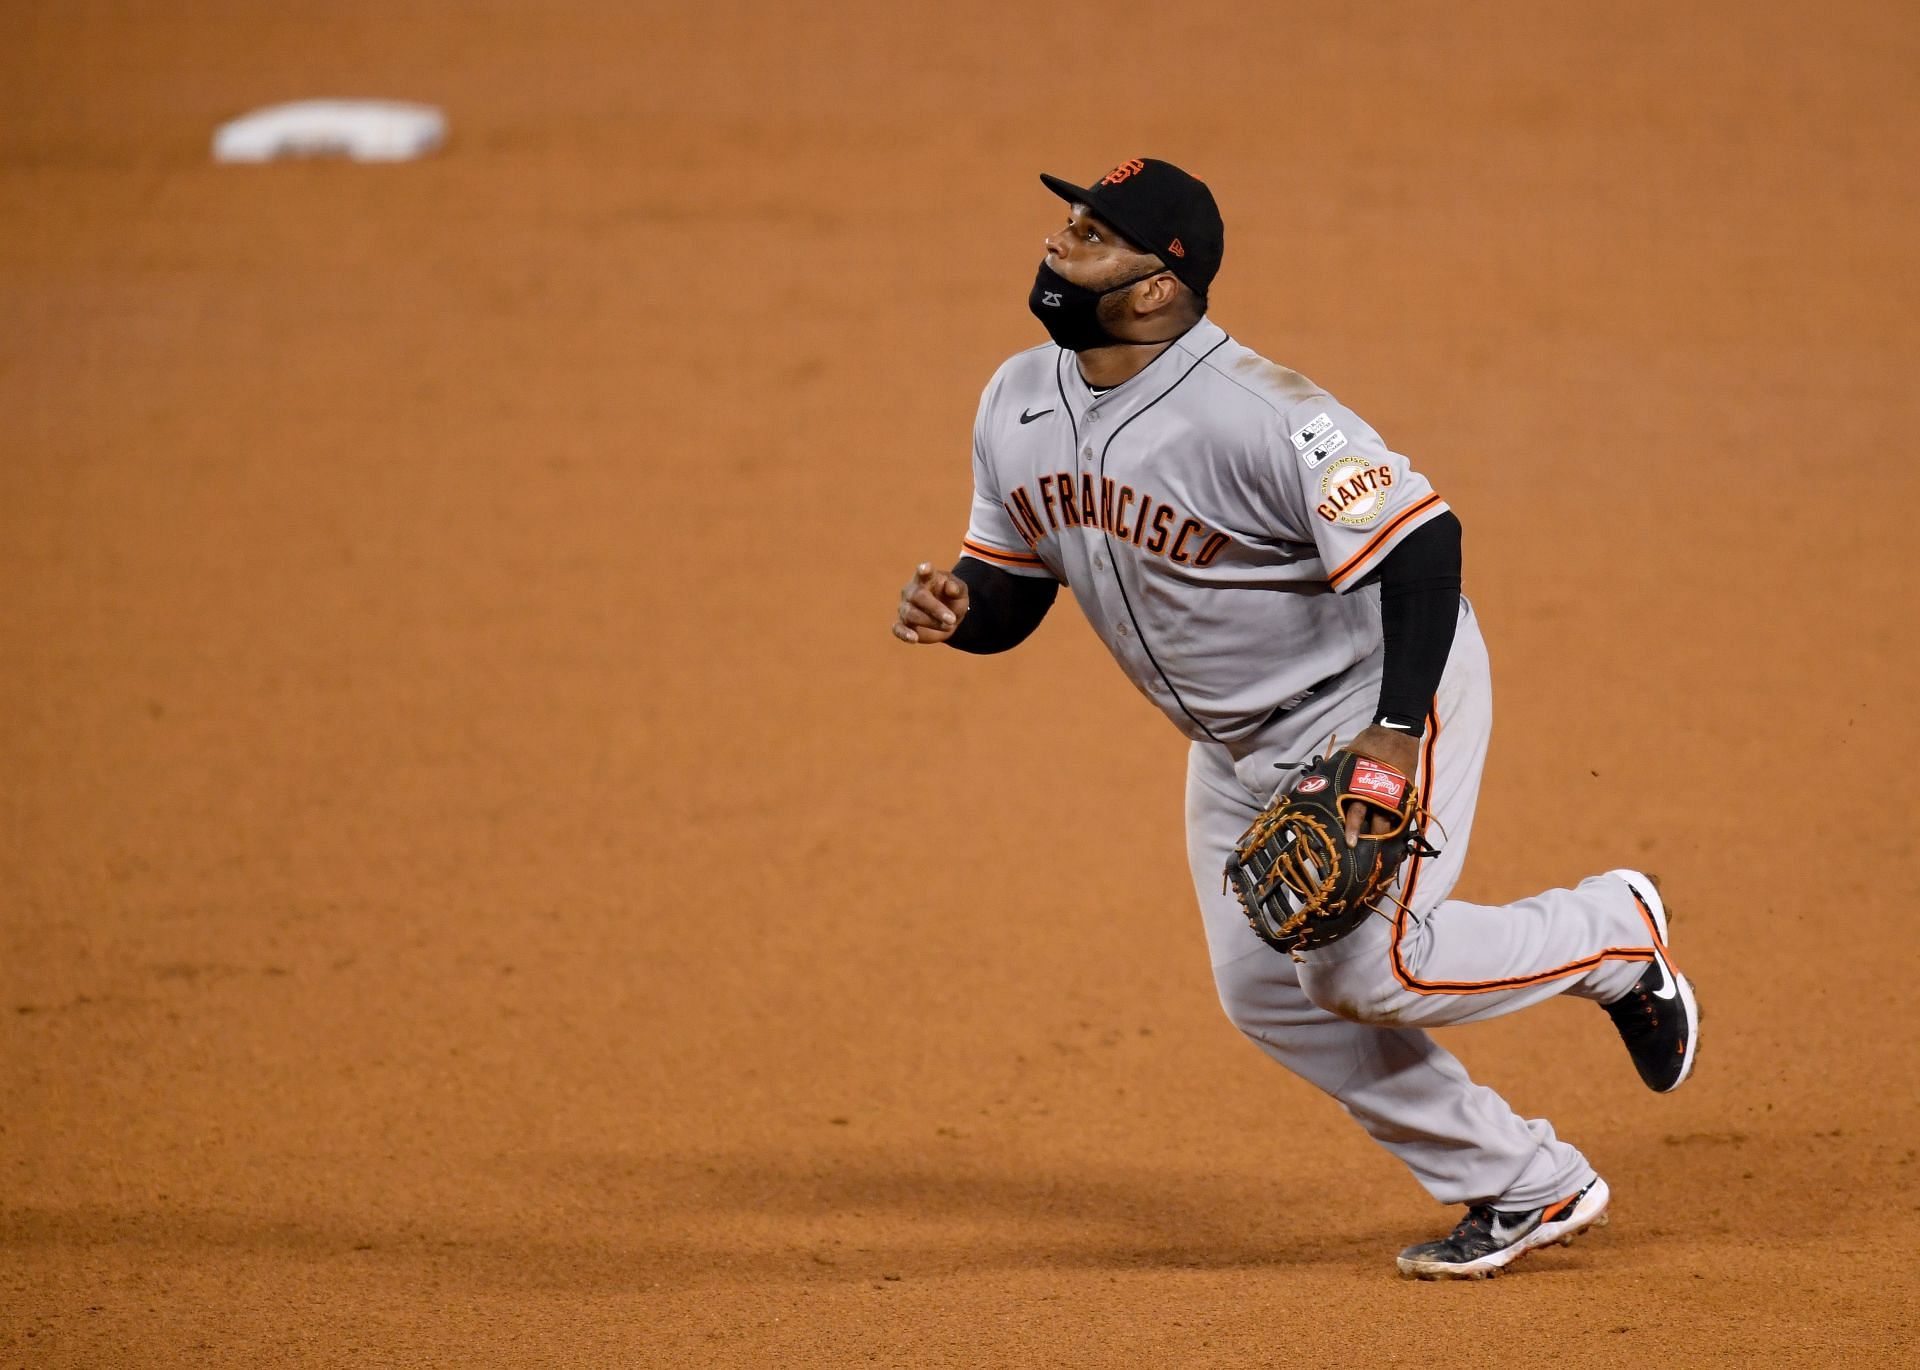 Pitching Panda: Pablo Sandoval pitches for Giants against Dodgers